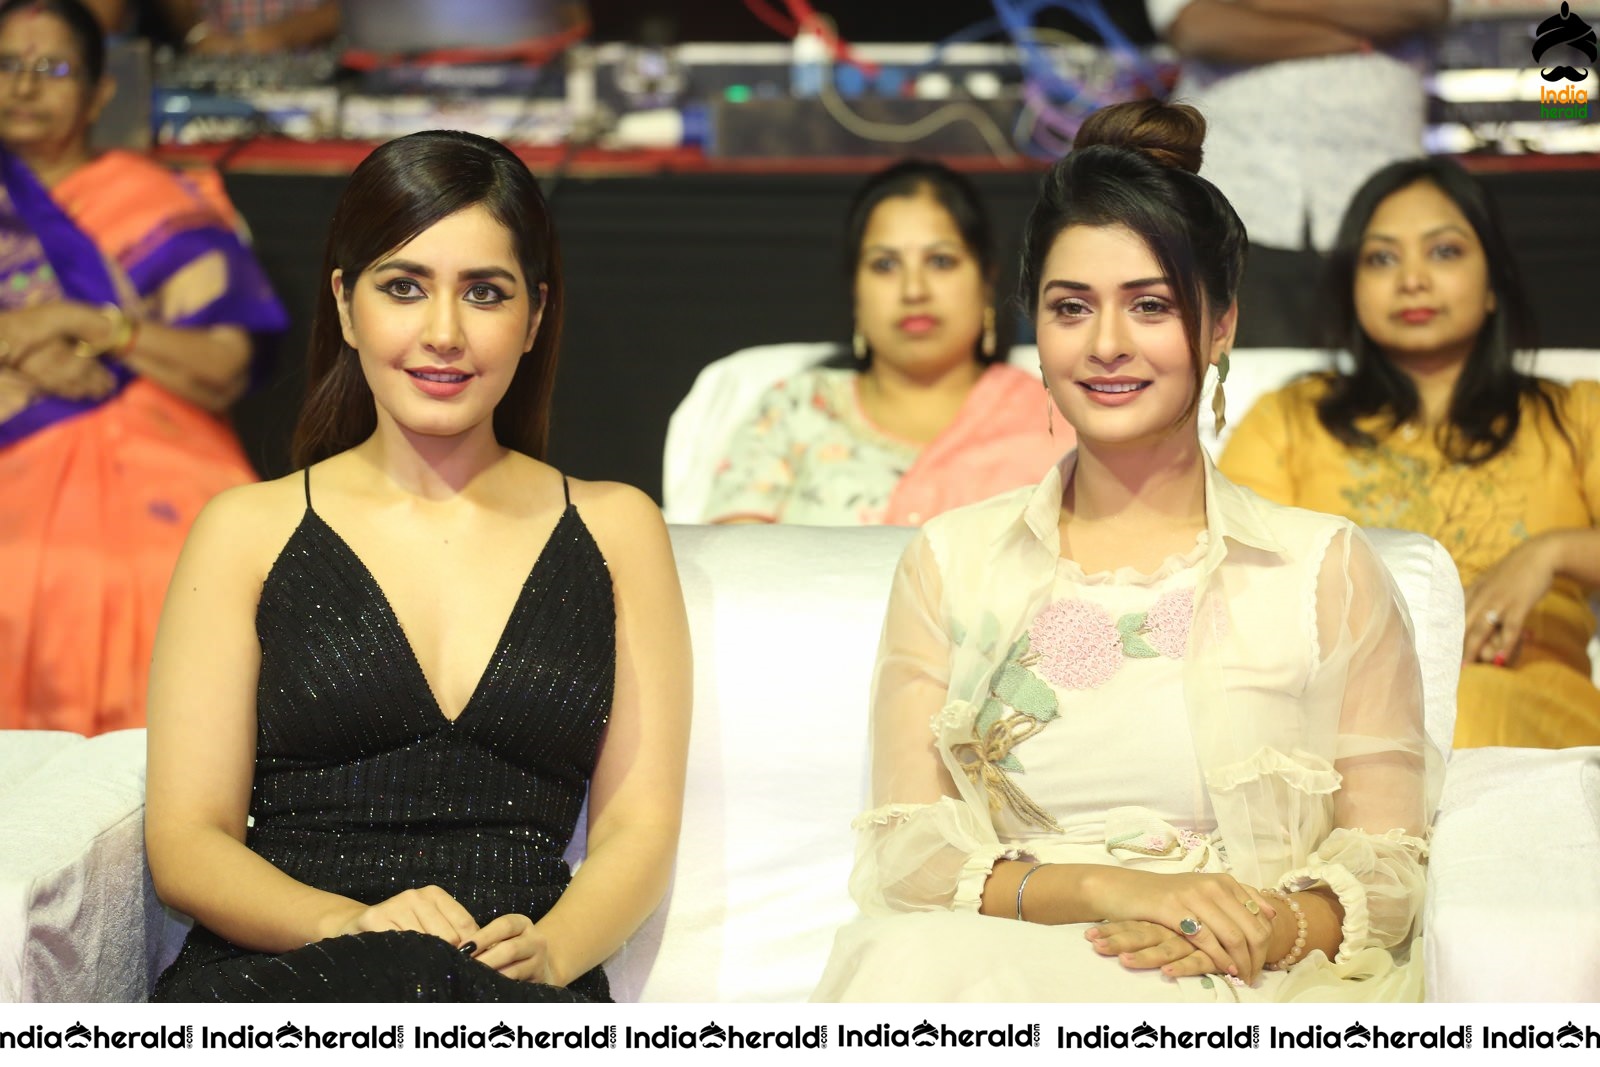 Raashi Khanna Slaying it in Black and she is all smiles Set 2